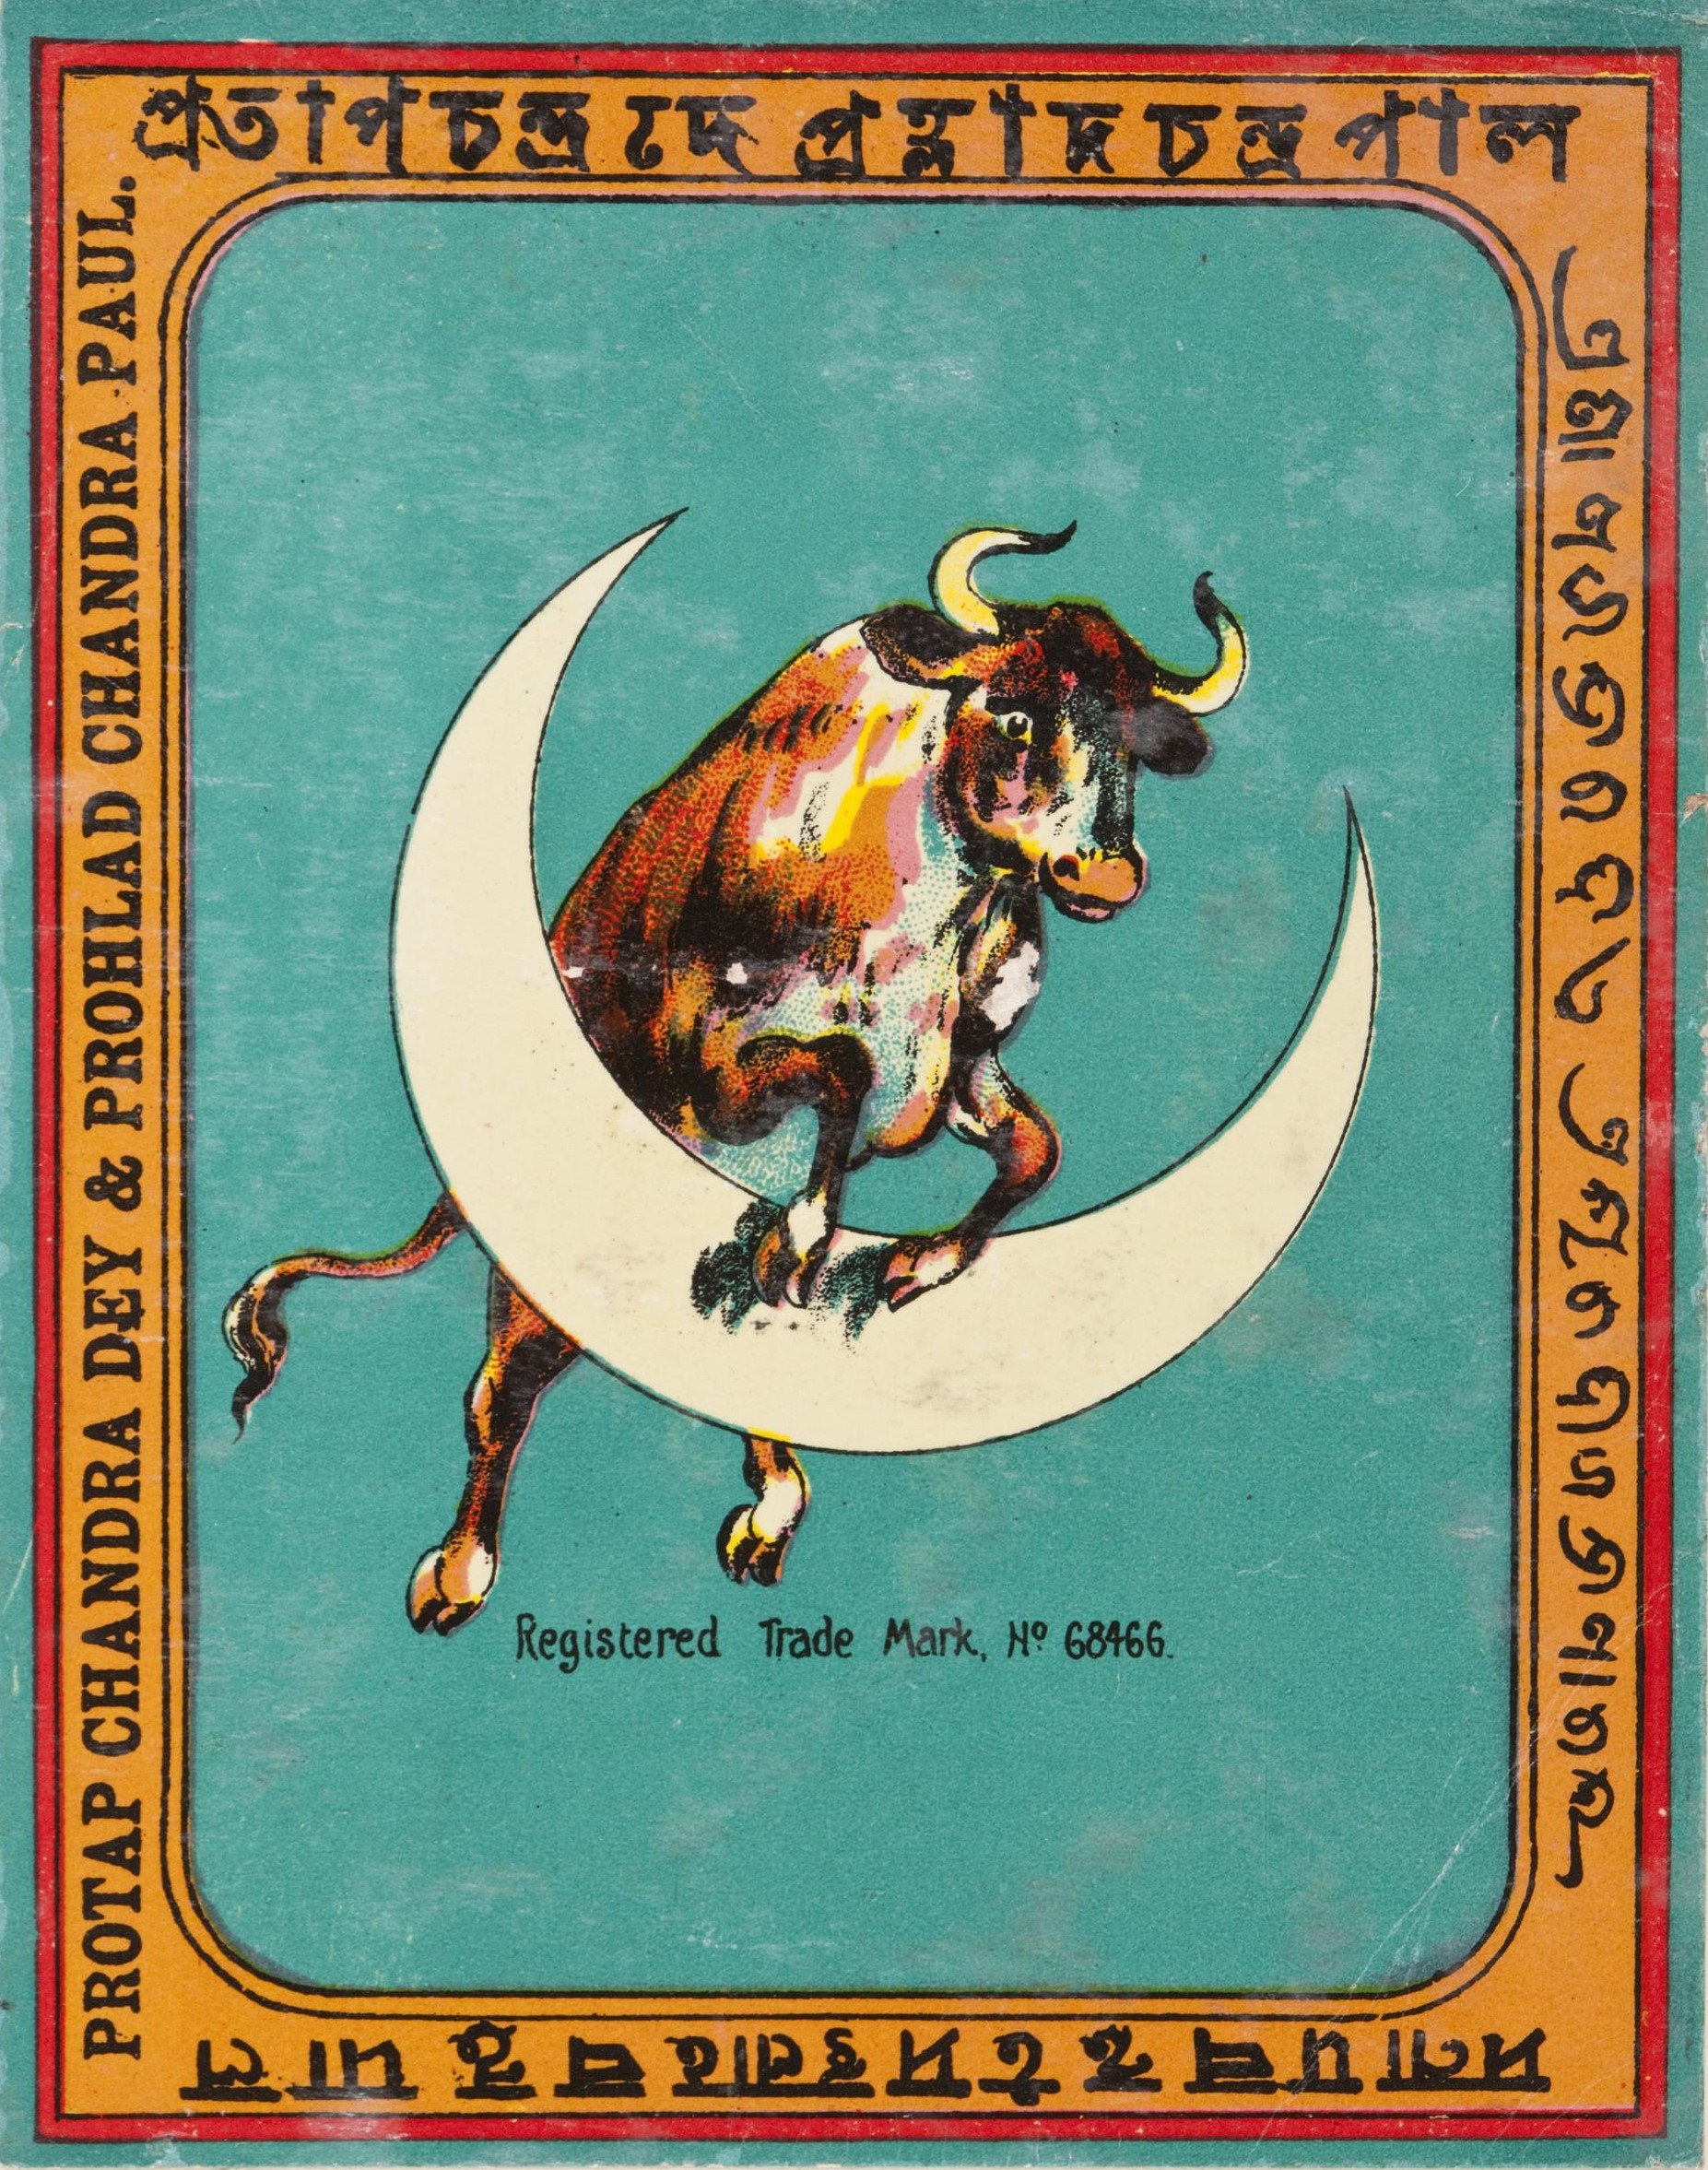 A shipper's ticket from the collection at the Museum of Science and Industry showing a cow jumping over the moon